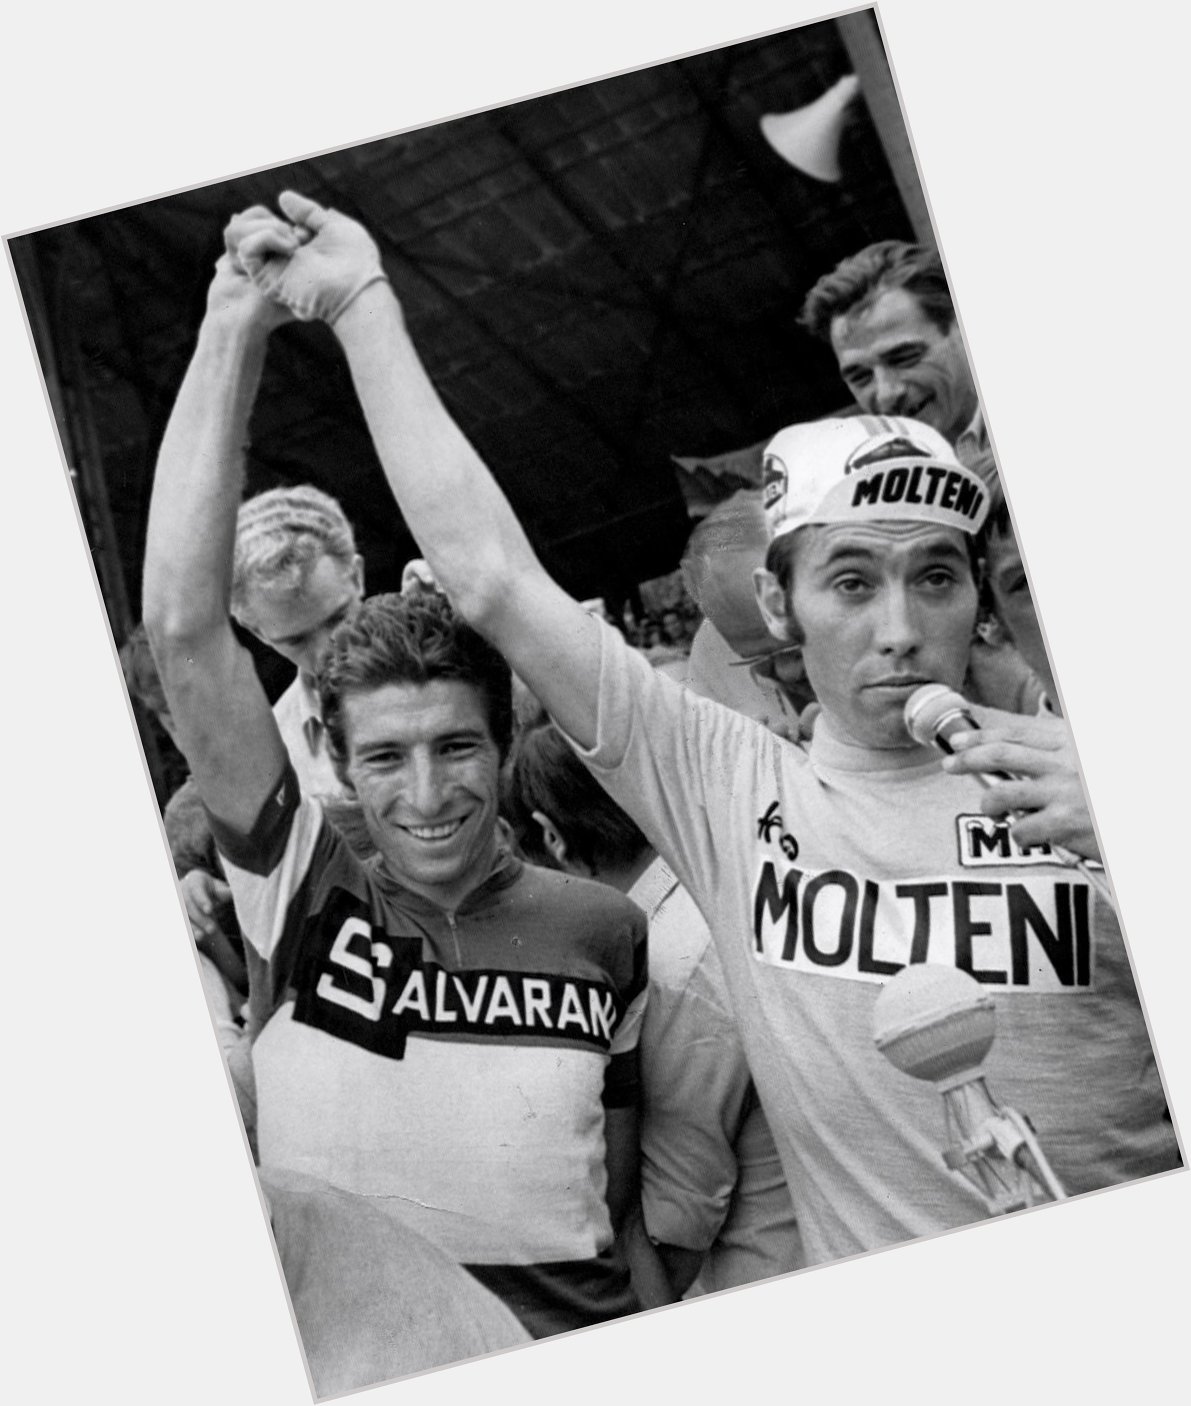 The  other side of one of the greatest and most loyal rivalries in the sports history: happy birthday,  Eddy Merckx! 